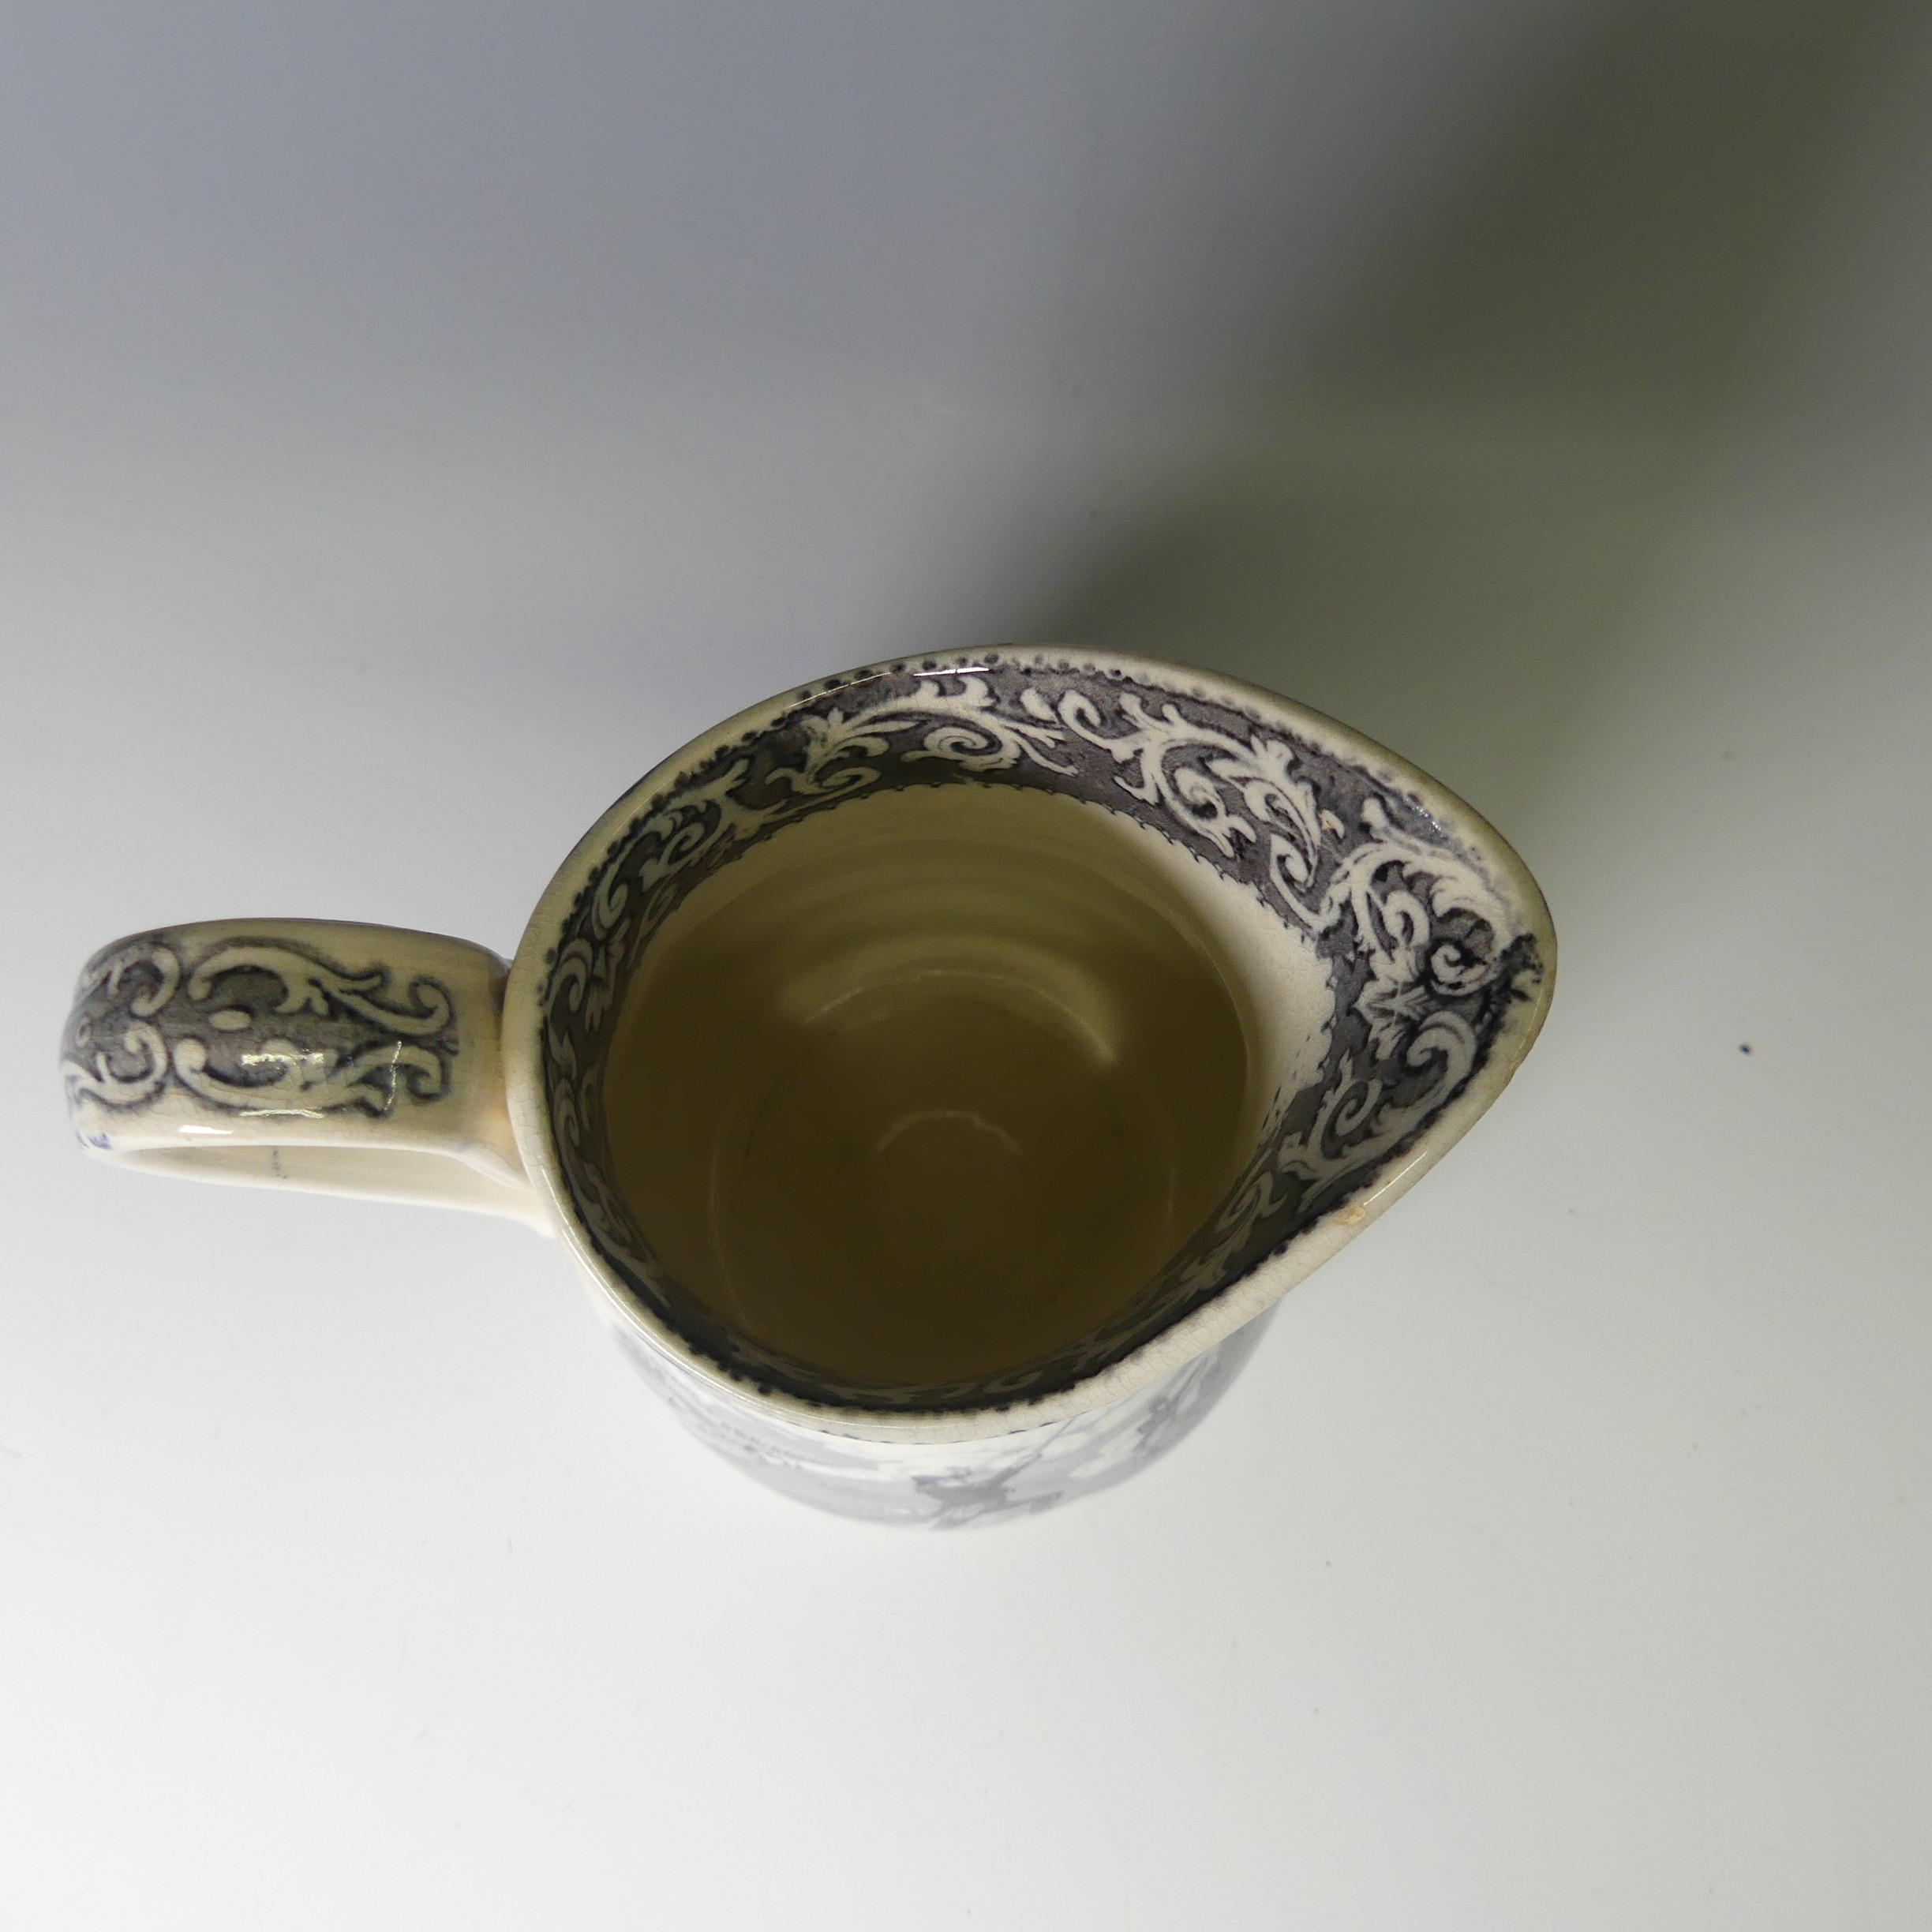 A Crimean War commemorative pottery Jug, attributed to Ynysmeudwy, with moulded loop handle, - Image 5 of 5